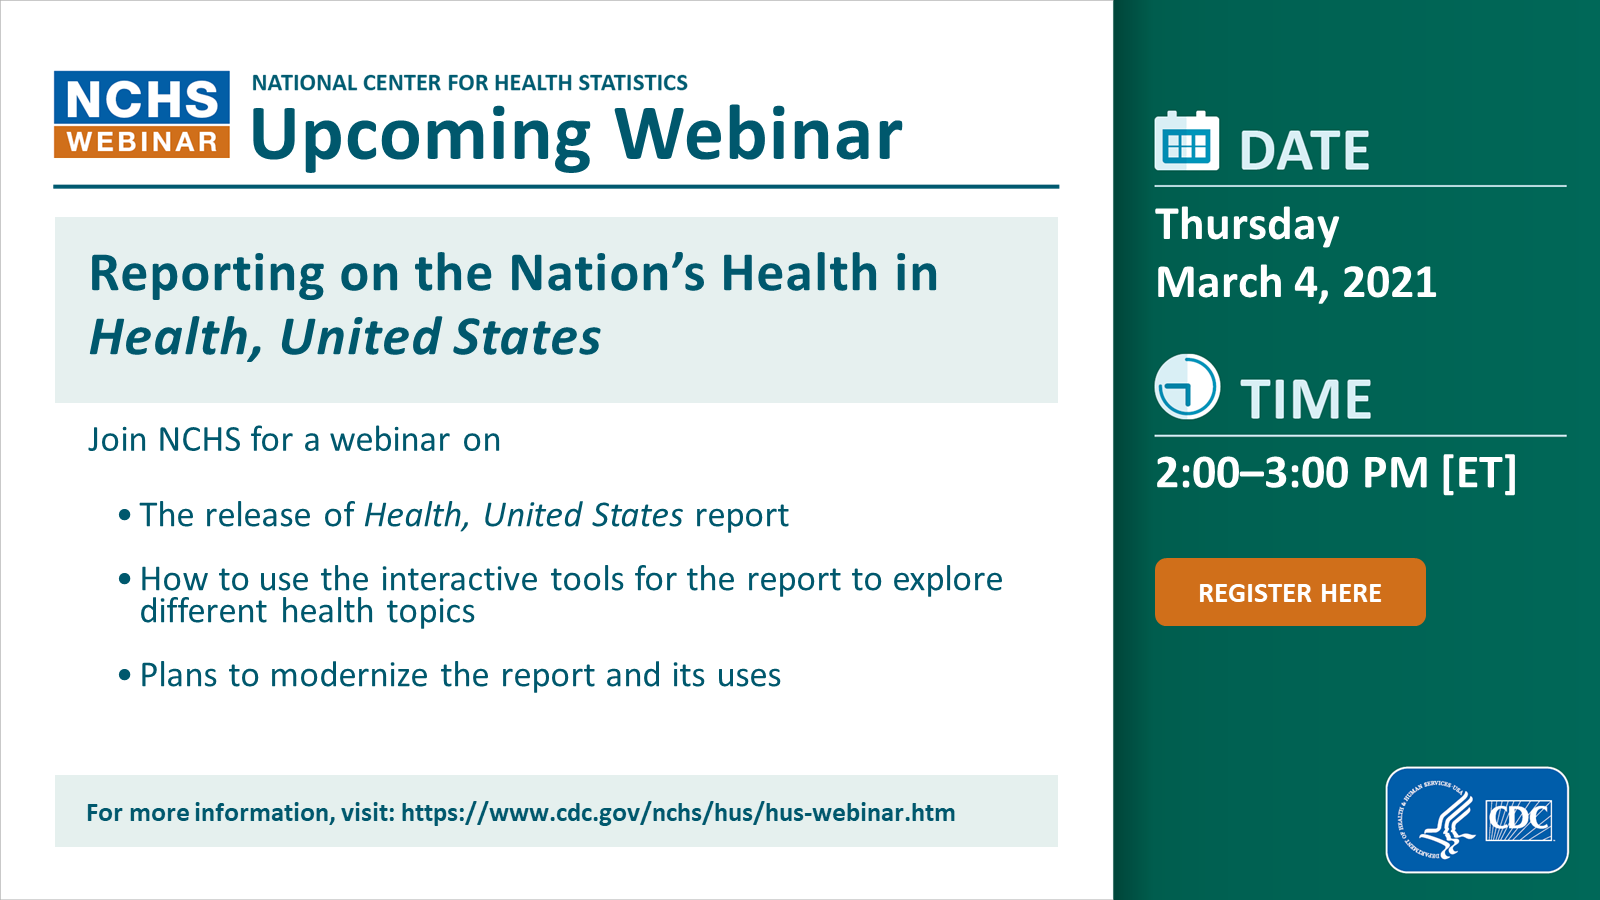 The image is a web graphic announcing a webinar about Health United States at NCHS on March 4 in the year 2021 at 2 p.m.